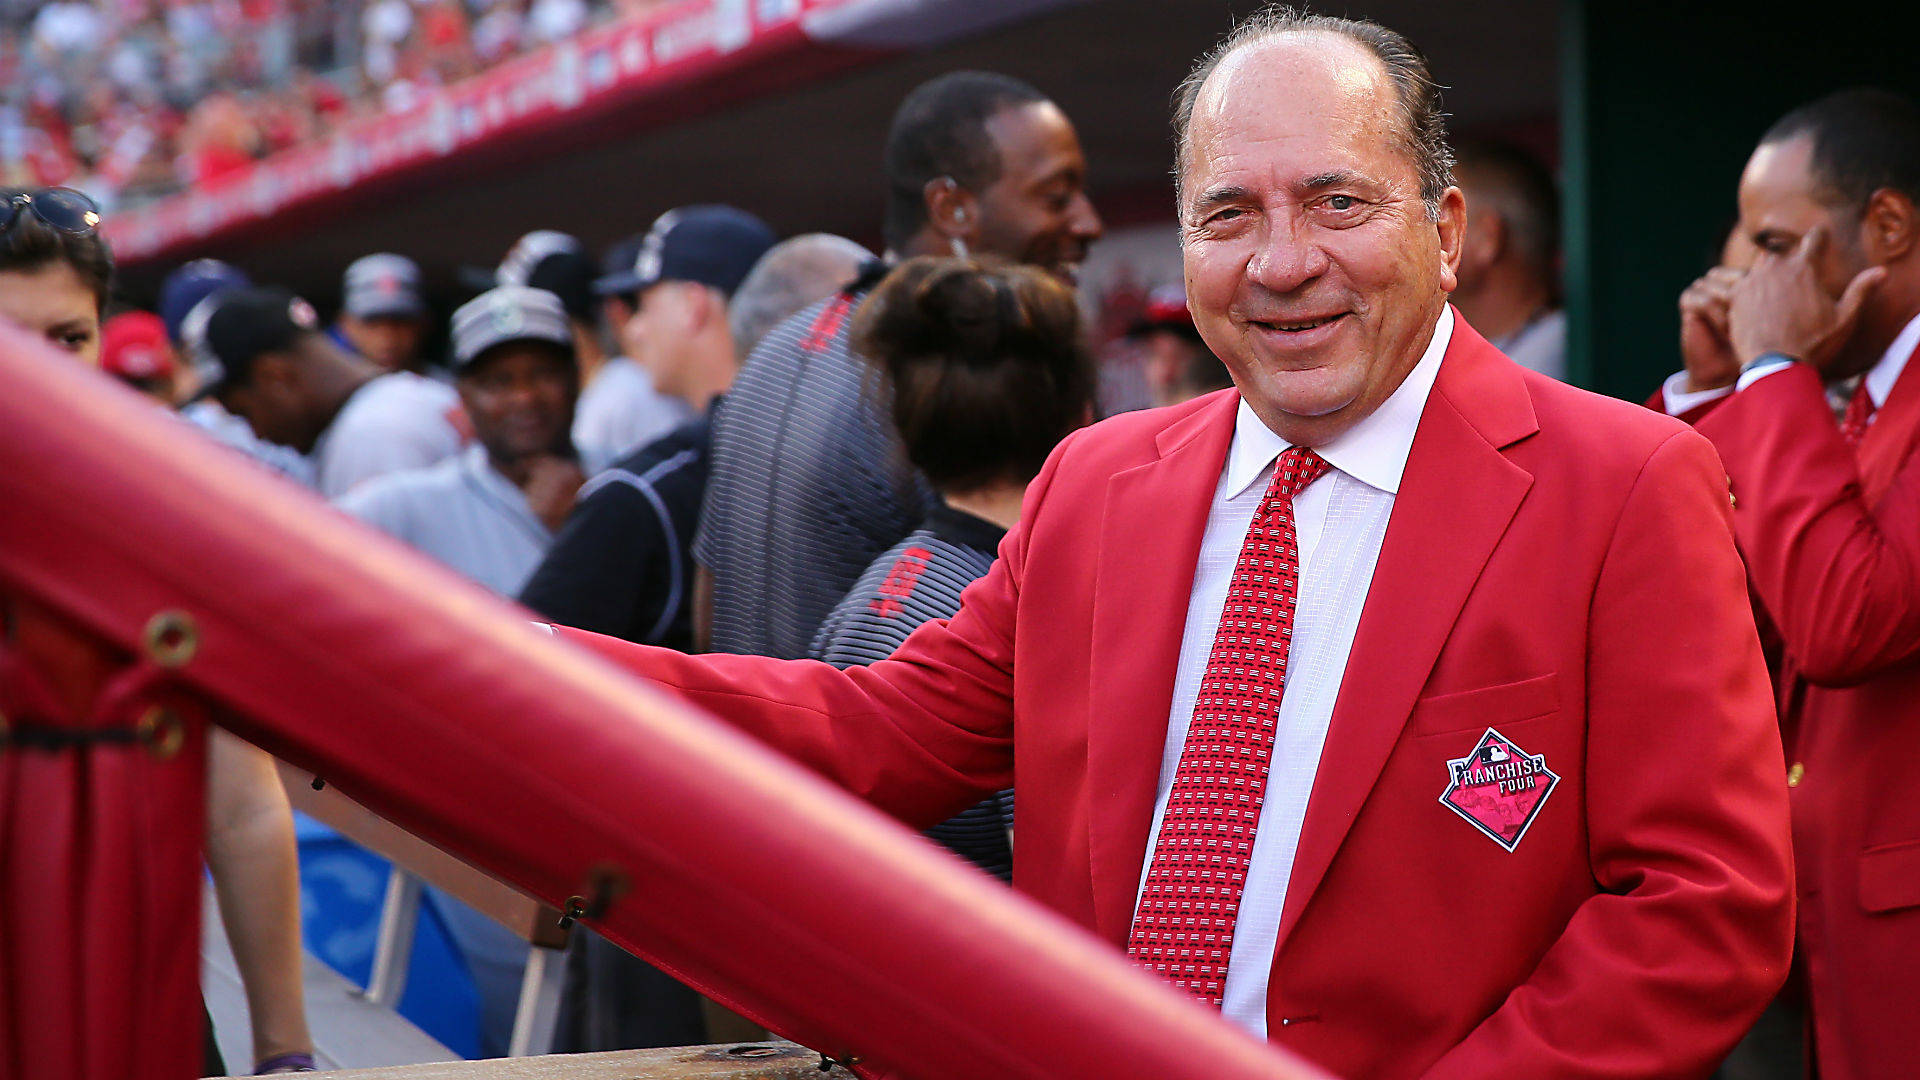 Johnny Bench In Red Suit